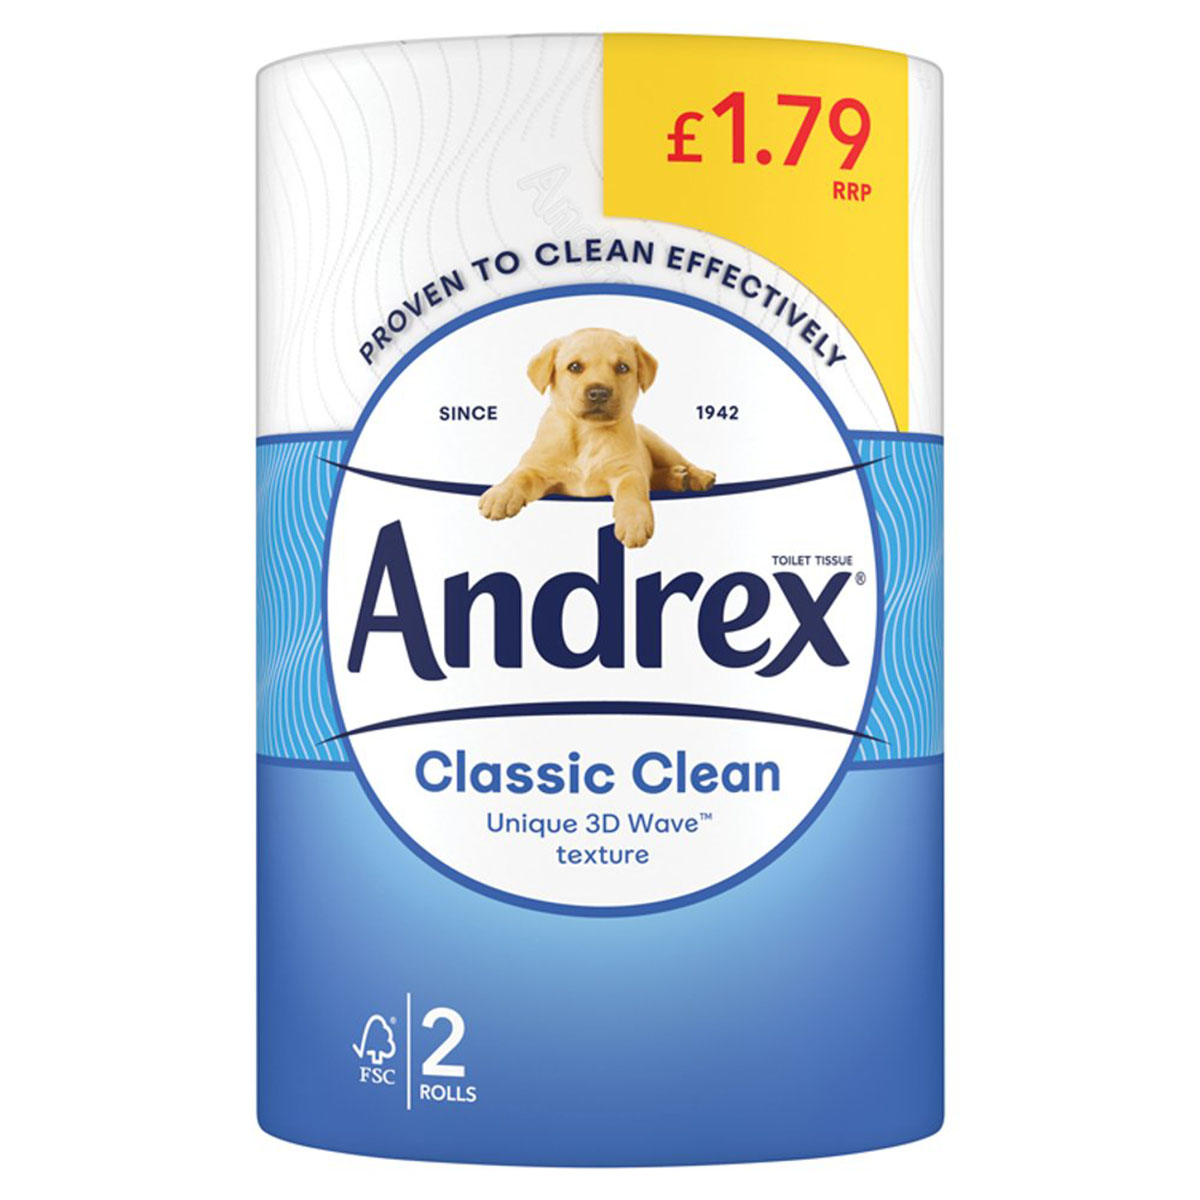 Andrex - Classic Clean Toilet Tissue - 2 Rolls - Continental Food Store